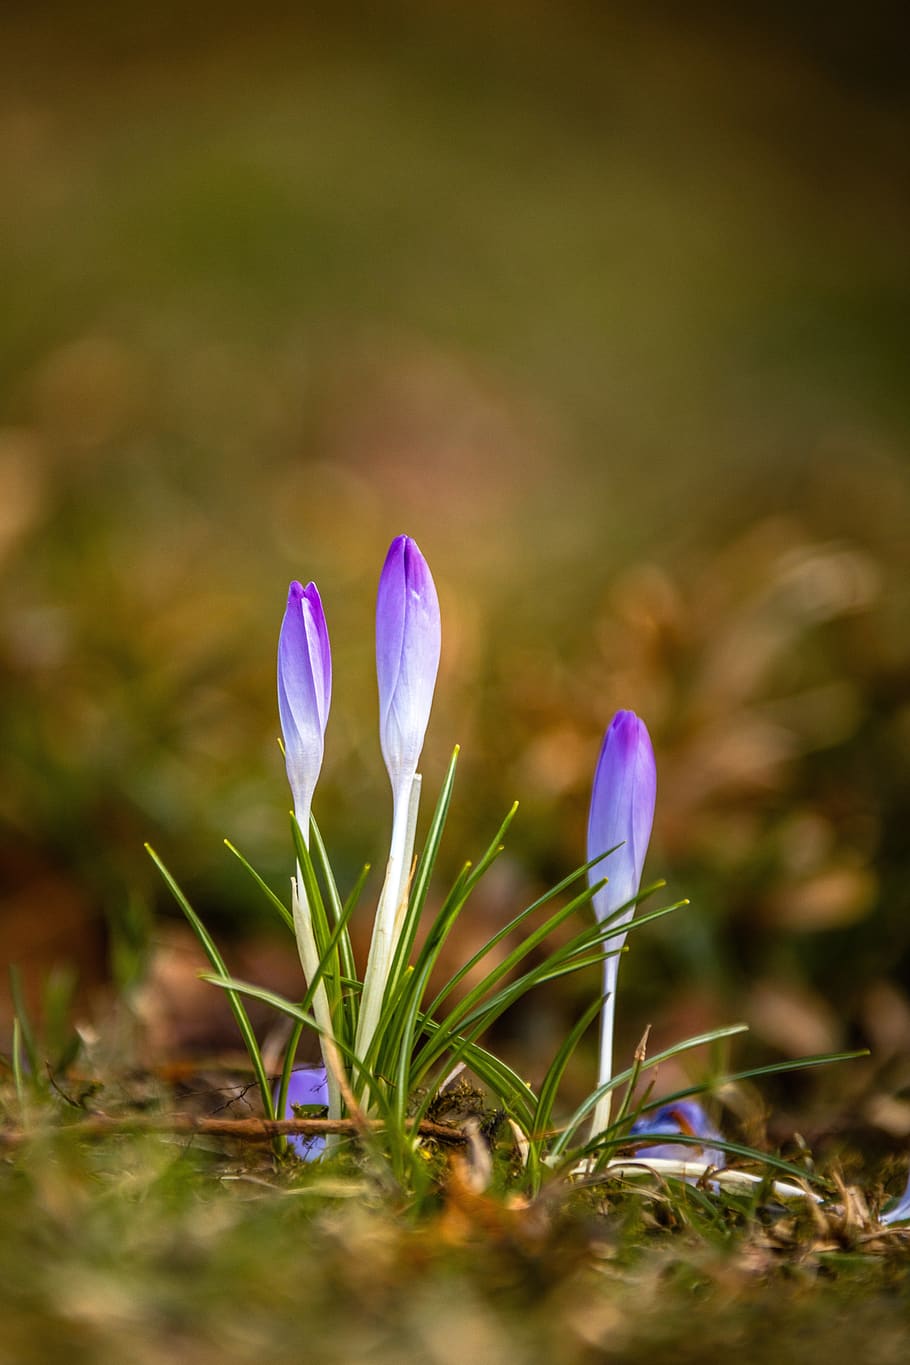 crocus, flower, meadow, nature, spring, plant, blossom, bloom, white, green